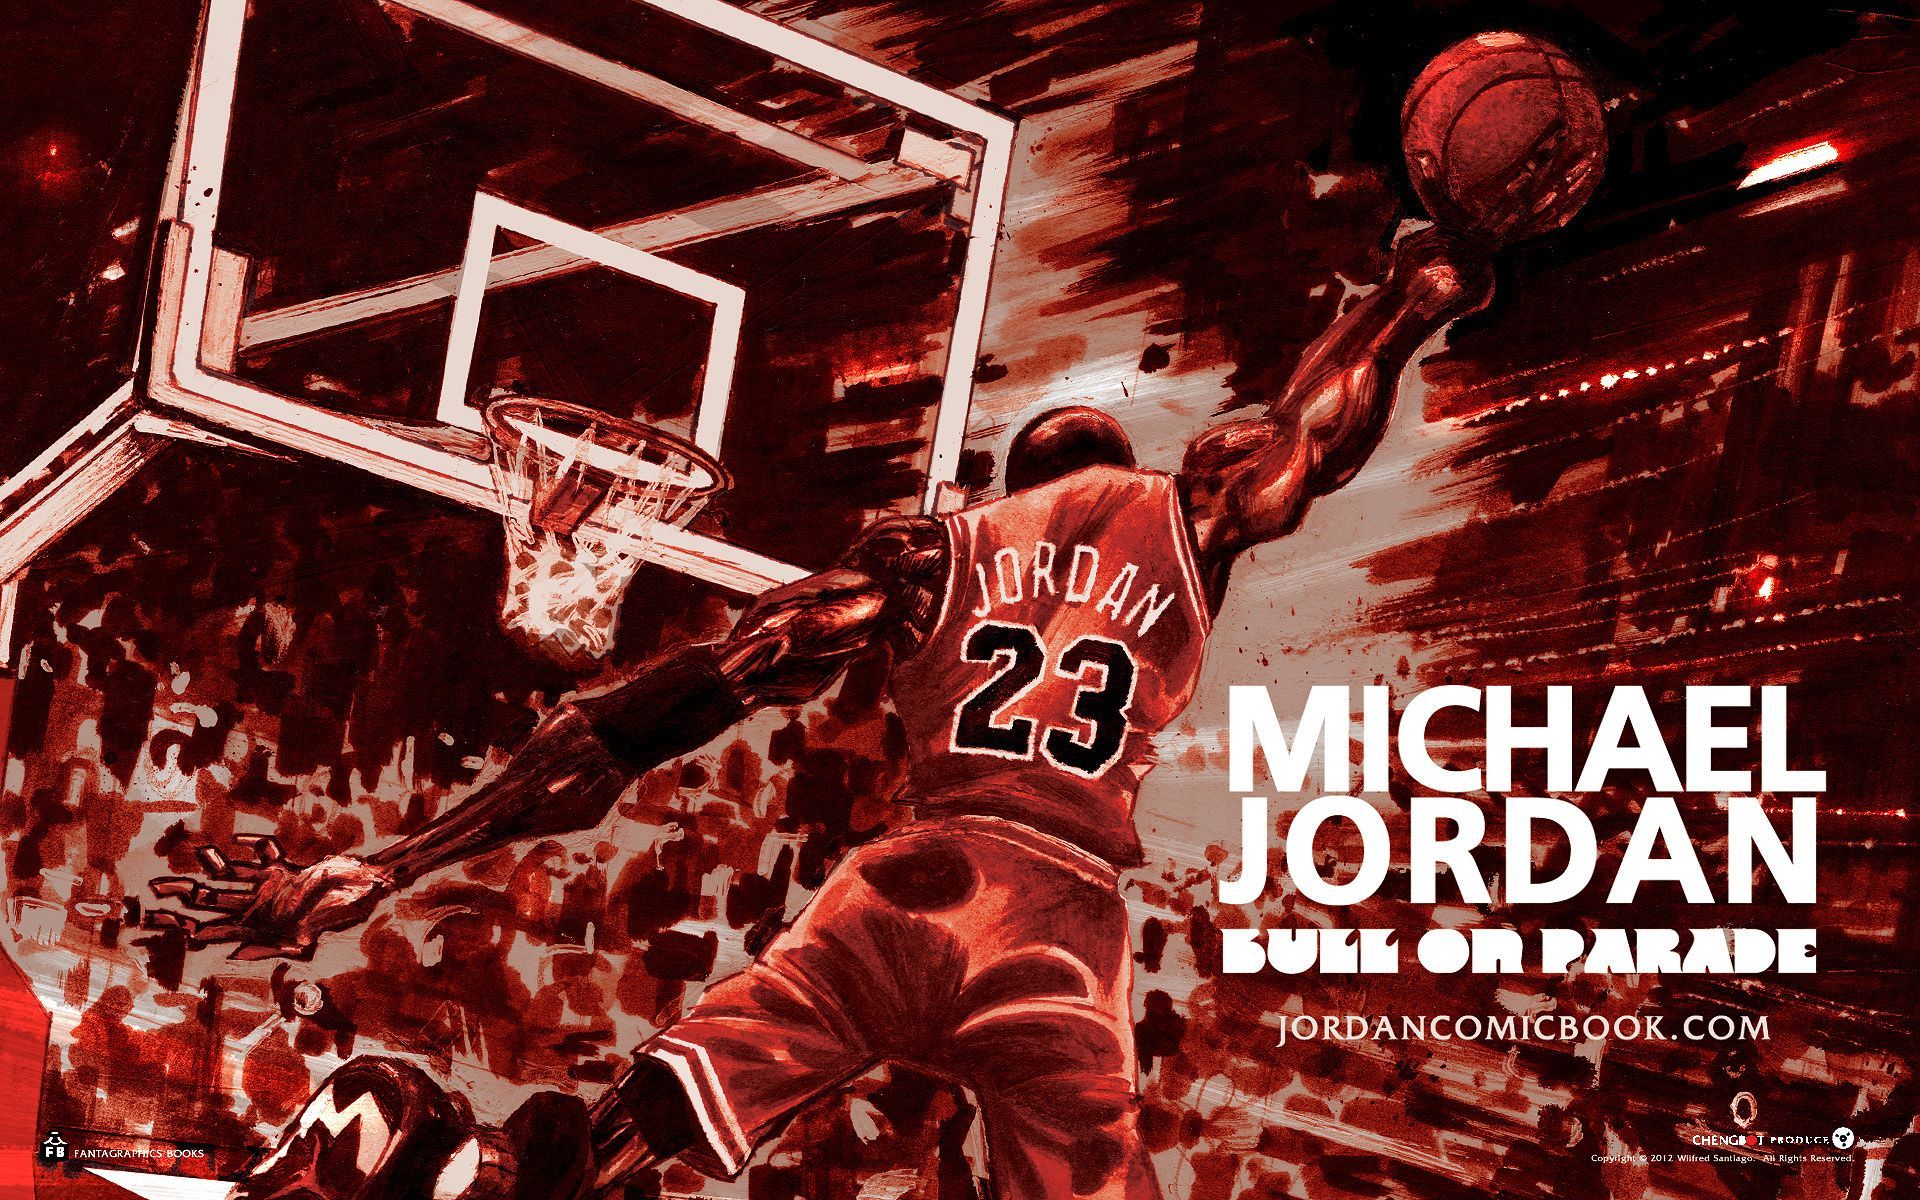 Michael Jordan Wallpapers Archives - Page 2 of 5 - Wallpaper